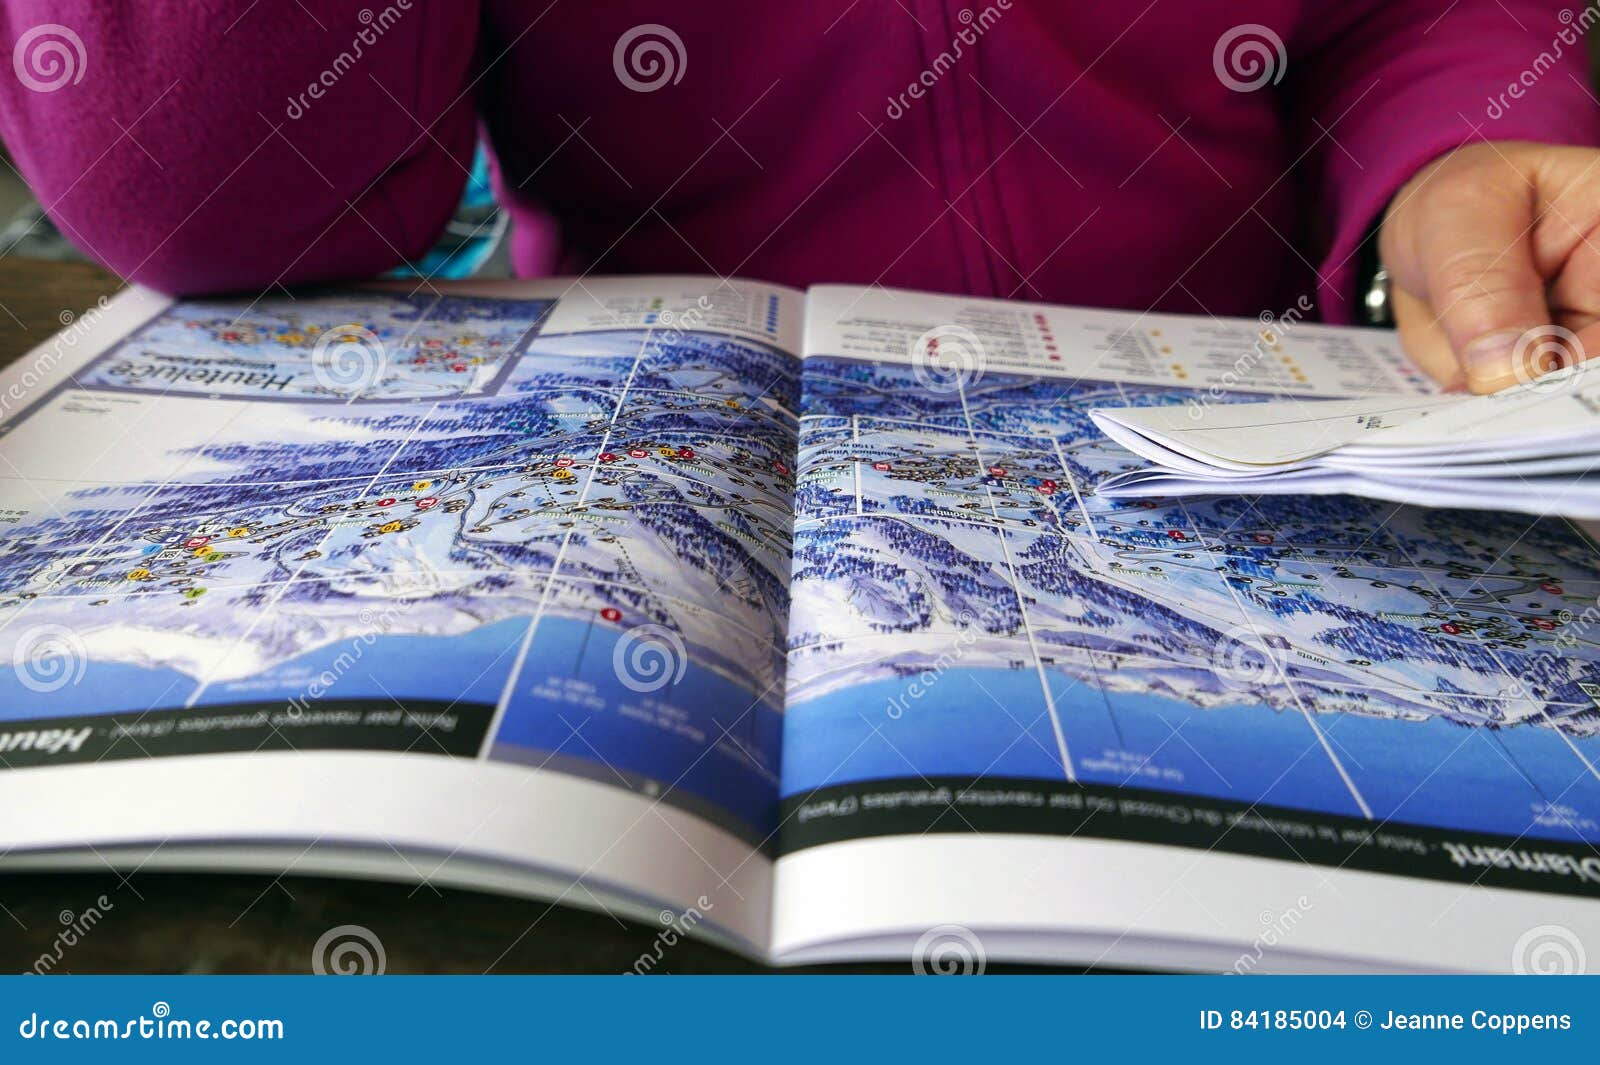 Looking At The Map Of A Ski Resort. Stock Photo - Image of locate